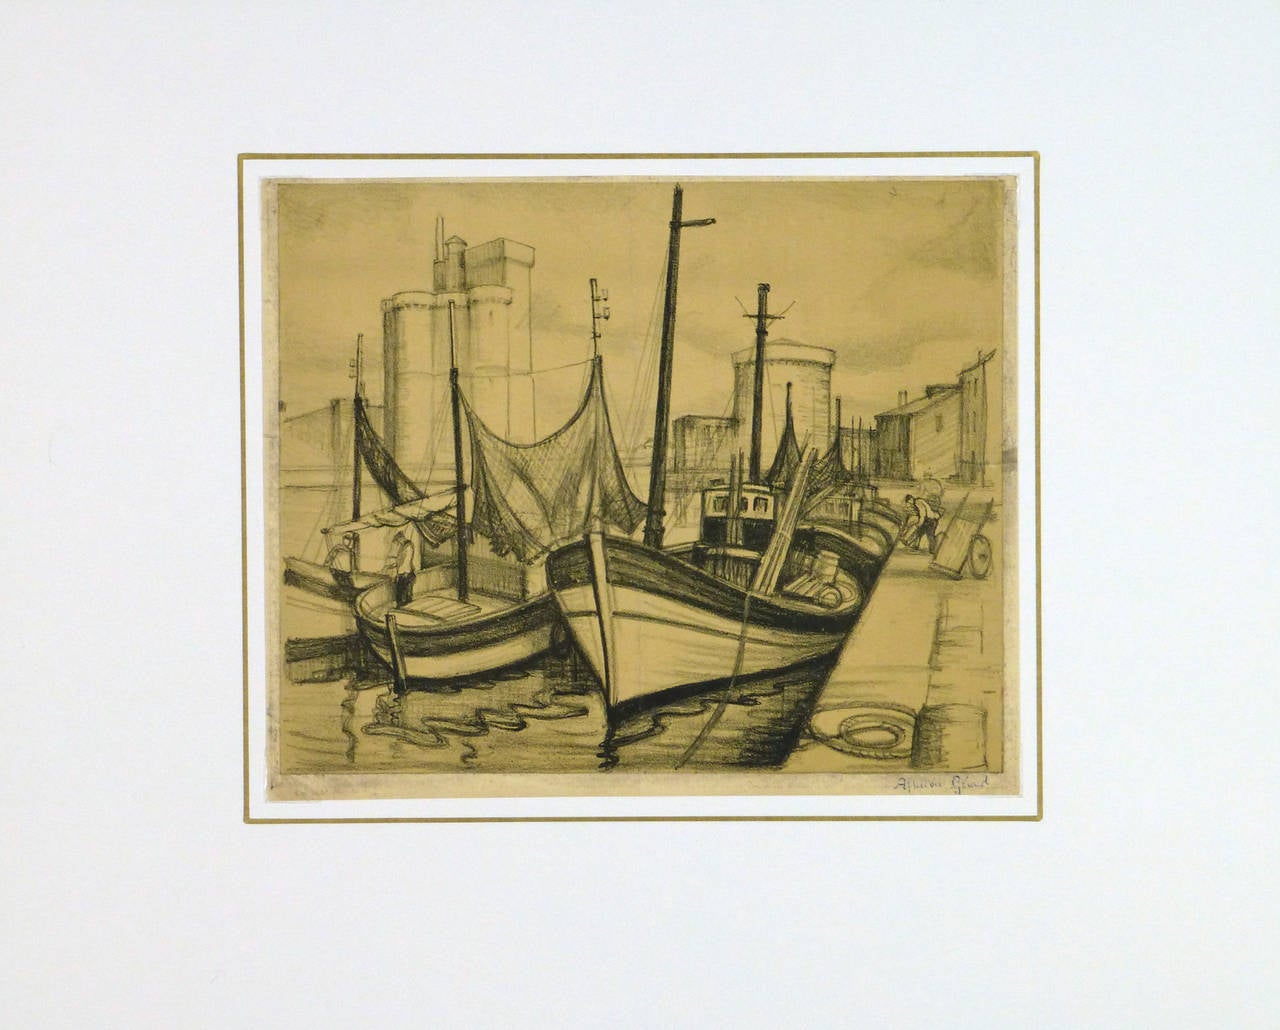 Strongly detailed seascape lithograph of docked fishing vessels in a lovely port of Provence, France by A. Gérard, circa 1930. Signed lower right.

Original vintage work of art on paper displayed on a white mat with a gold border. Mat fits a